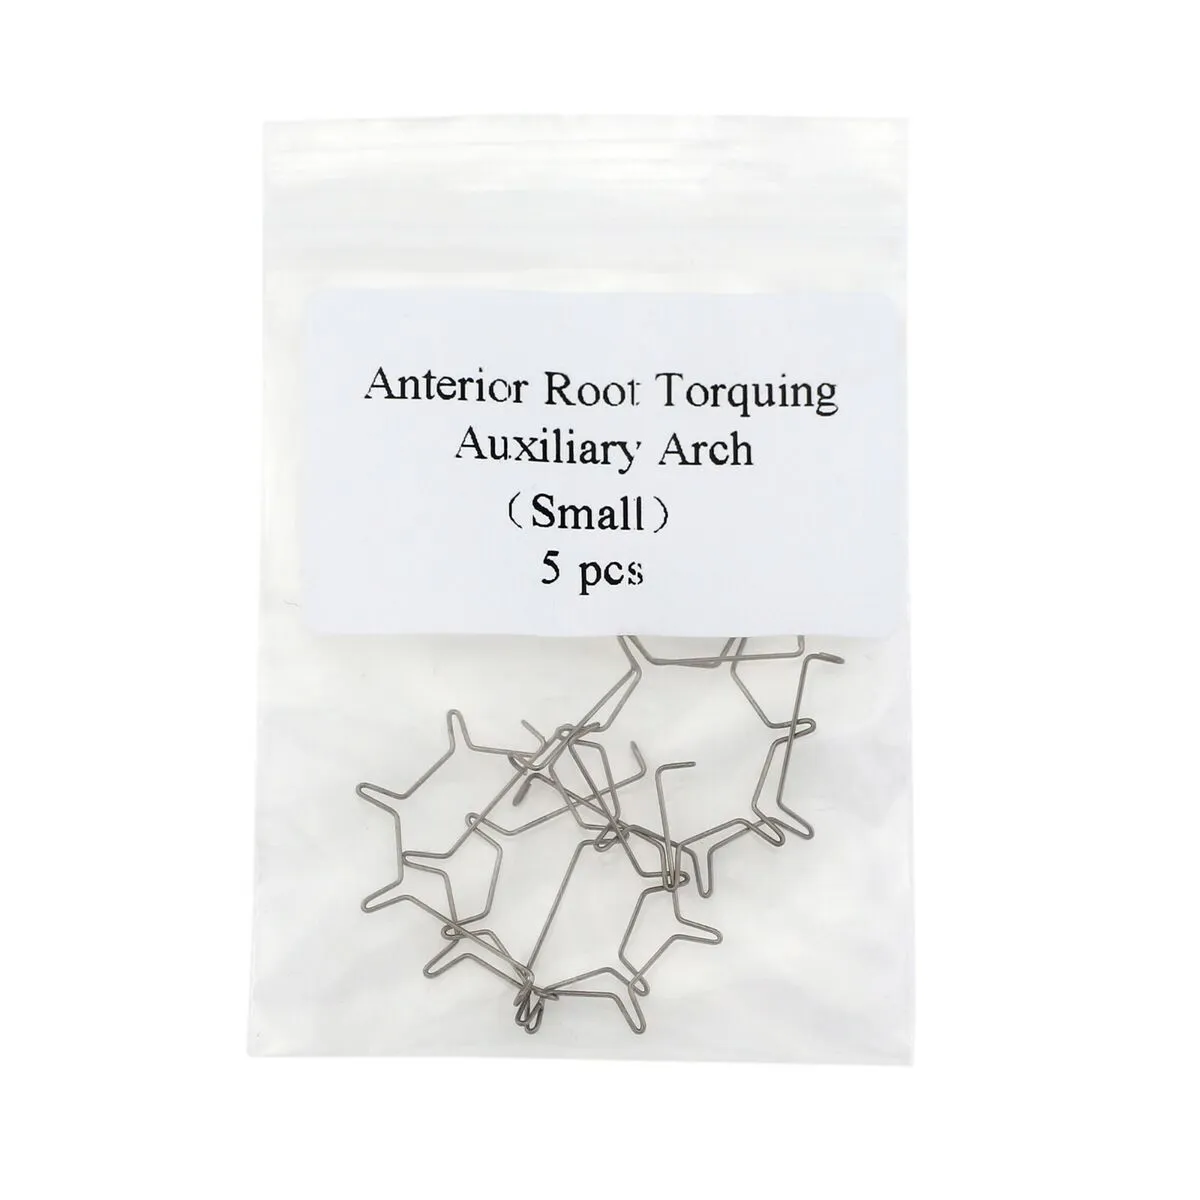 Anterior Root torquing auxiliary arch